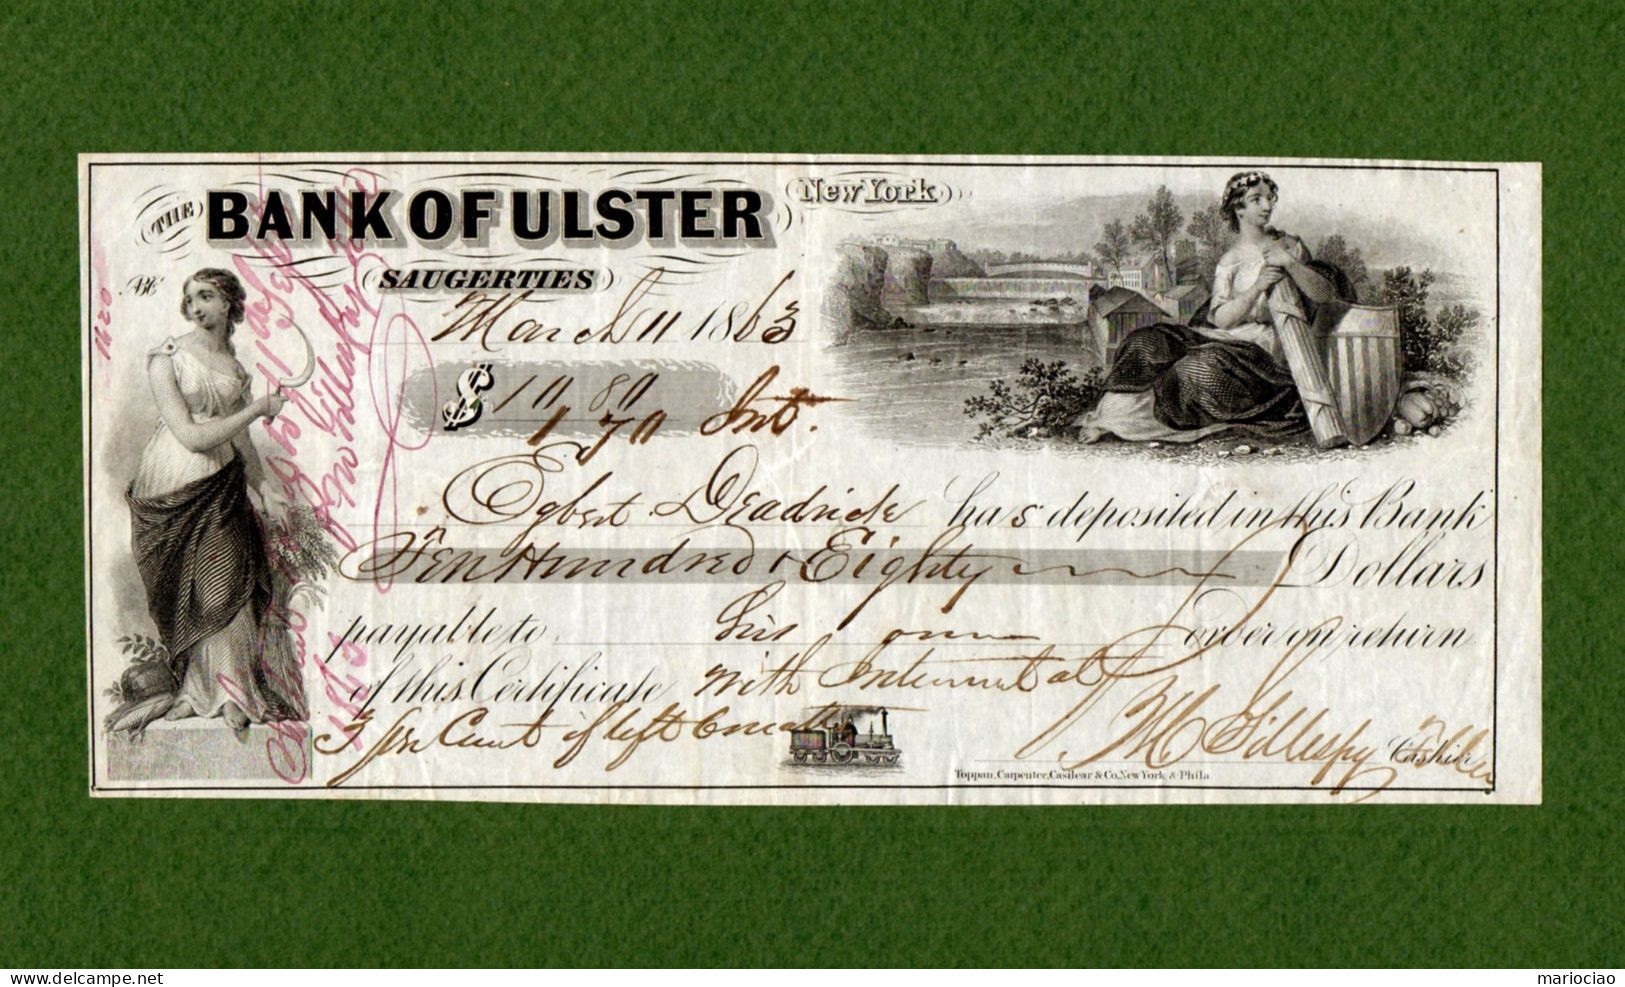 USA Check CIVIL WAR ERA Bank Of Ulster Saugerties New York 1863 VERY RARE - Confederate Currency (1861-1864)